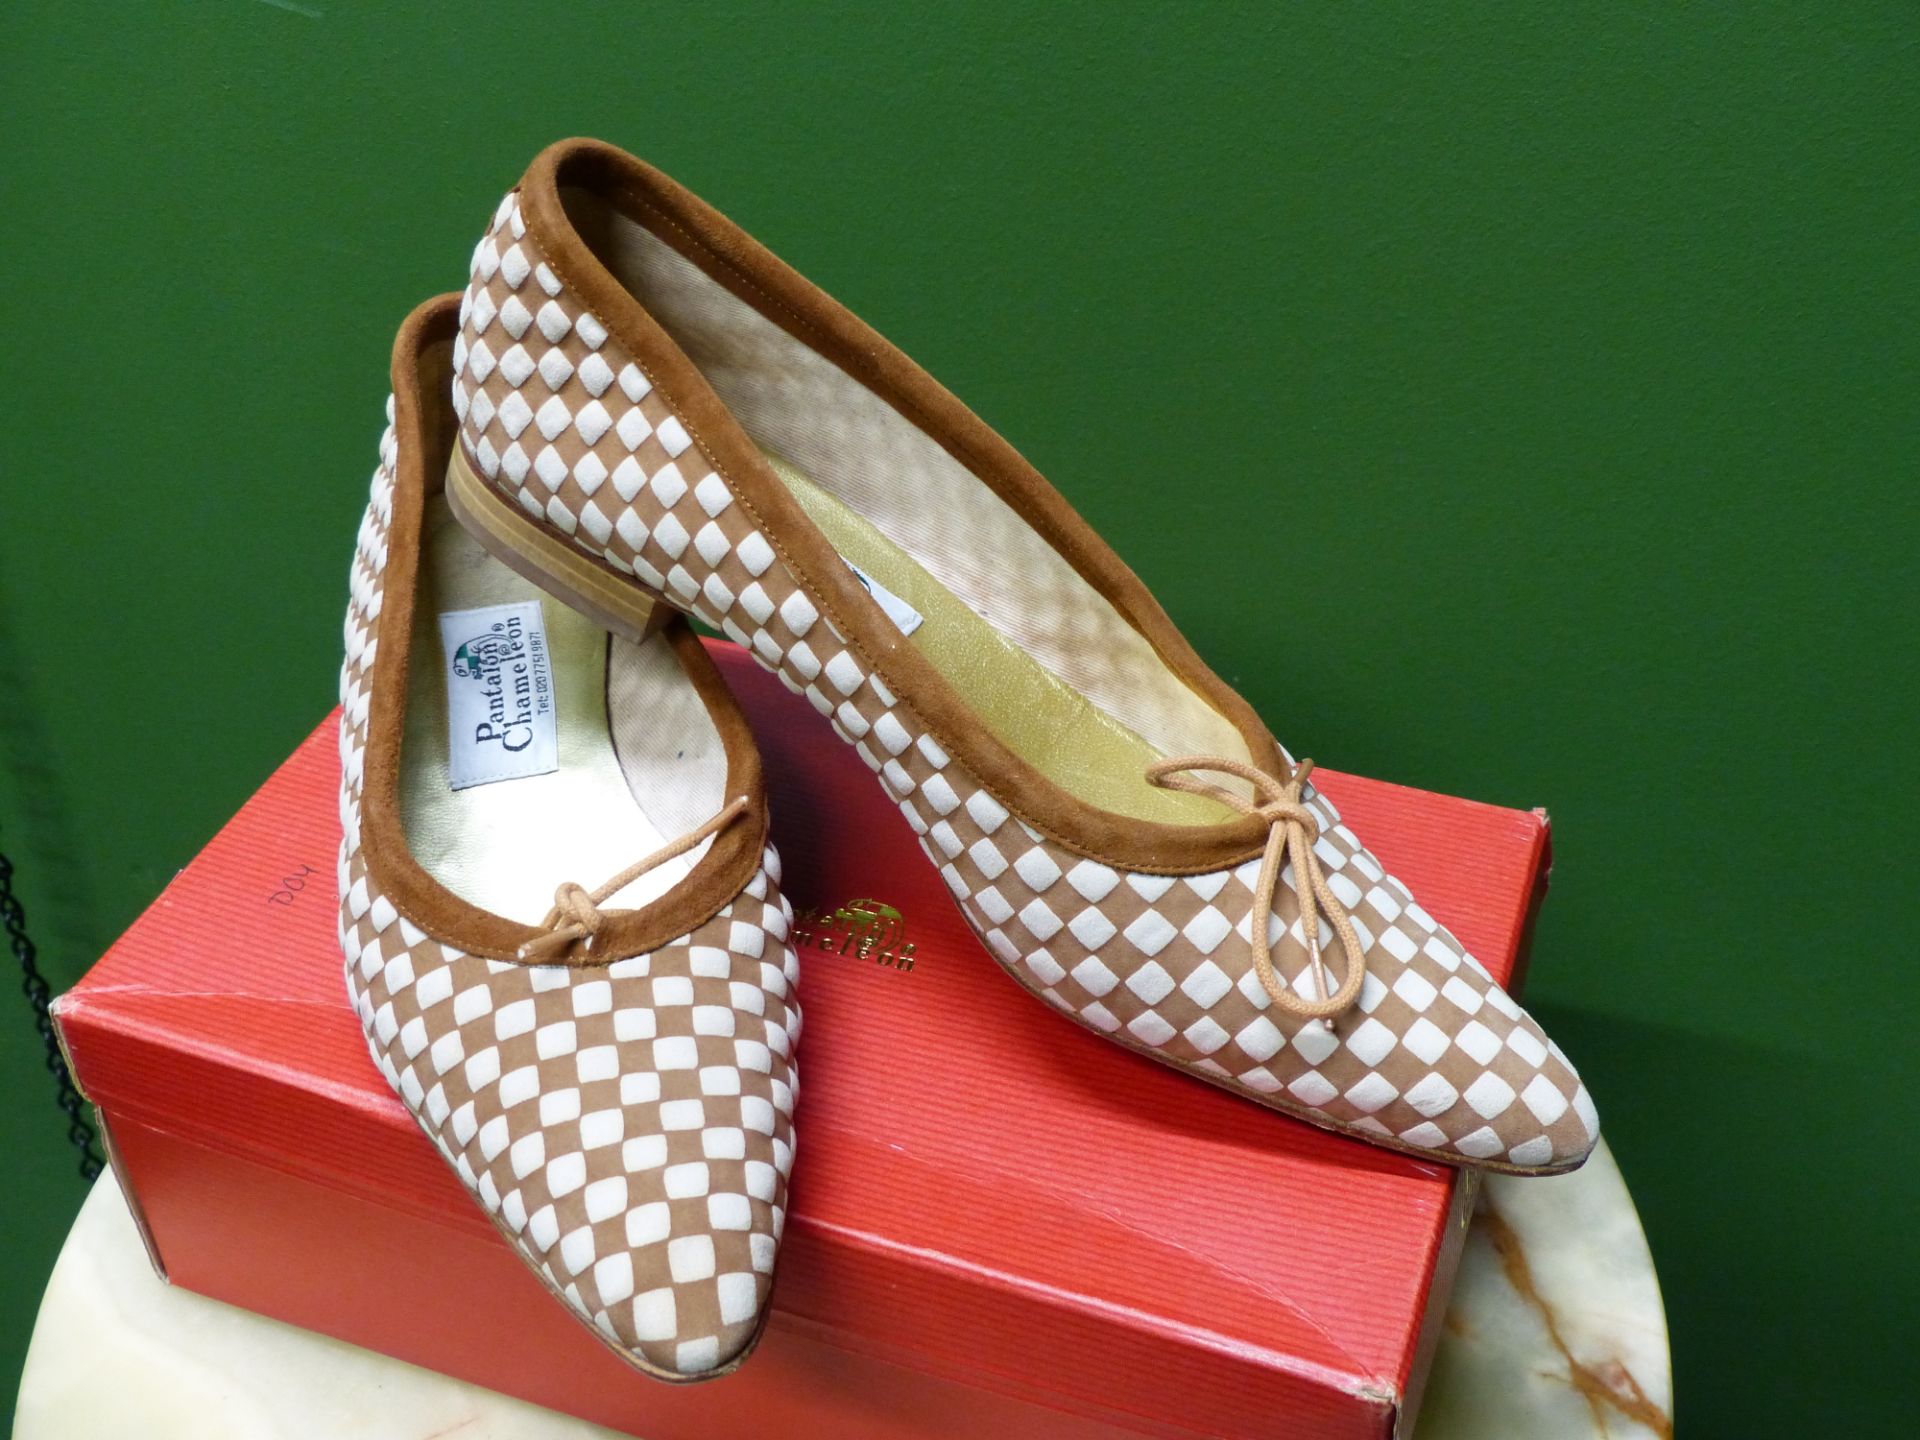 SHOES. TWO PAIRS PANTALON CHAMELEON FRENCH SIZE EUR 40 TAN AND BEIGE SUEDE SLIP ON'S, AND CREAM - Image 7 of 9